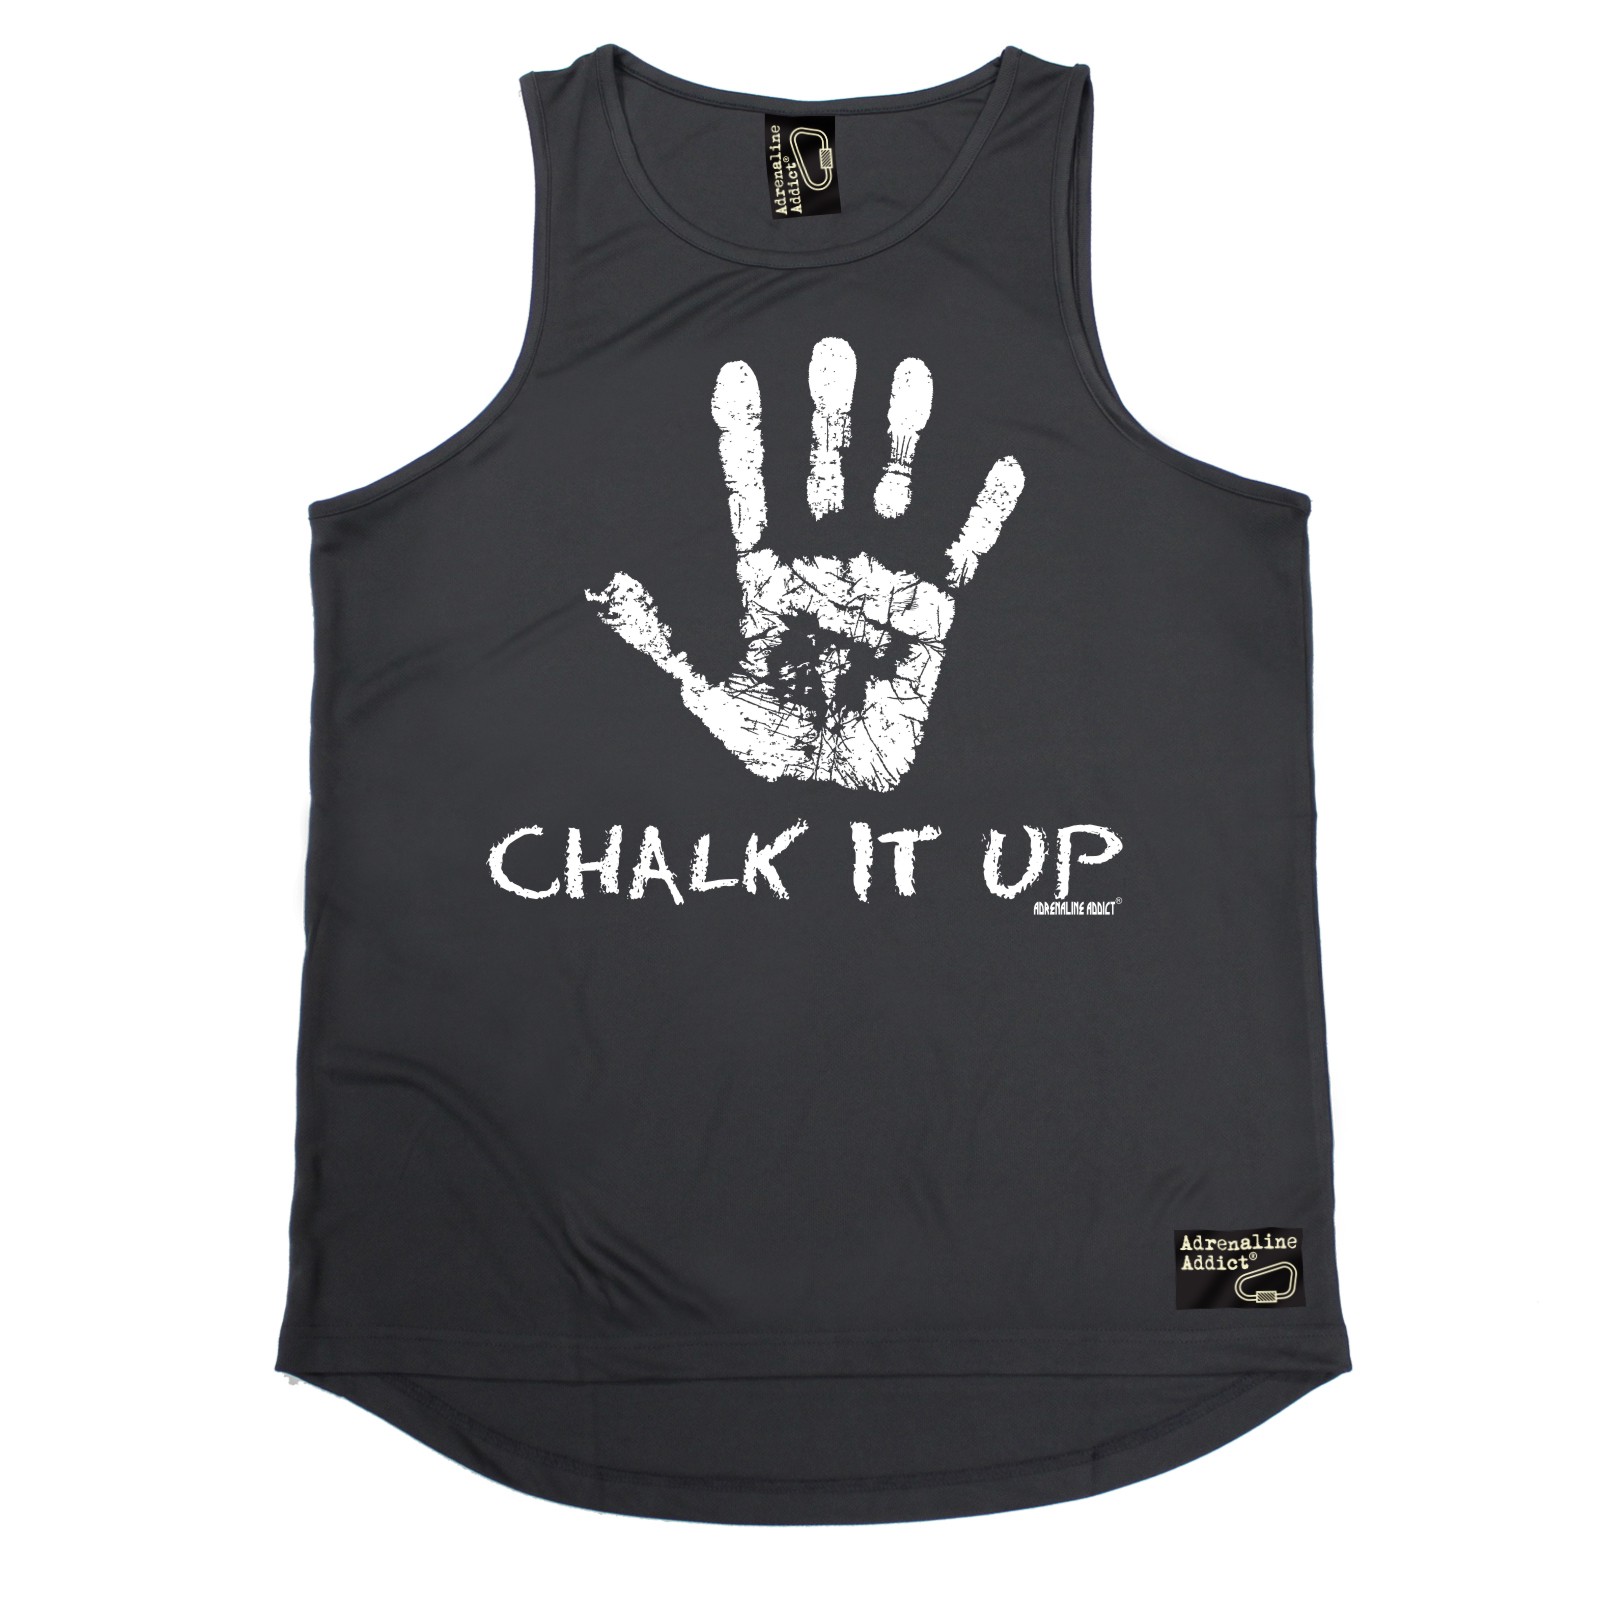 MENS Chalk It Up Breathable top bouldering tee Gift sports T SHIRT TANK TOP 